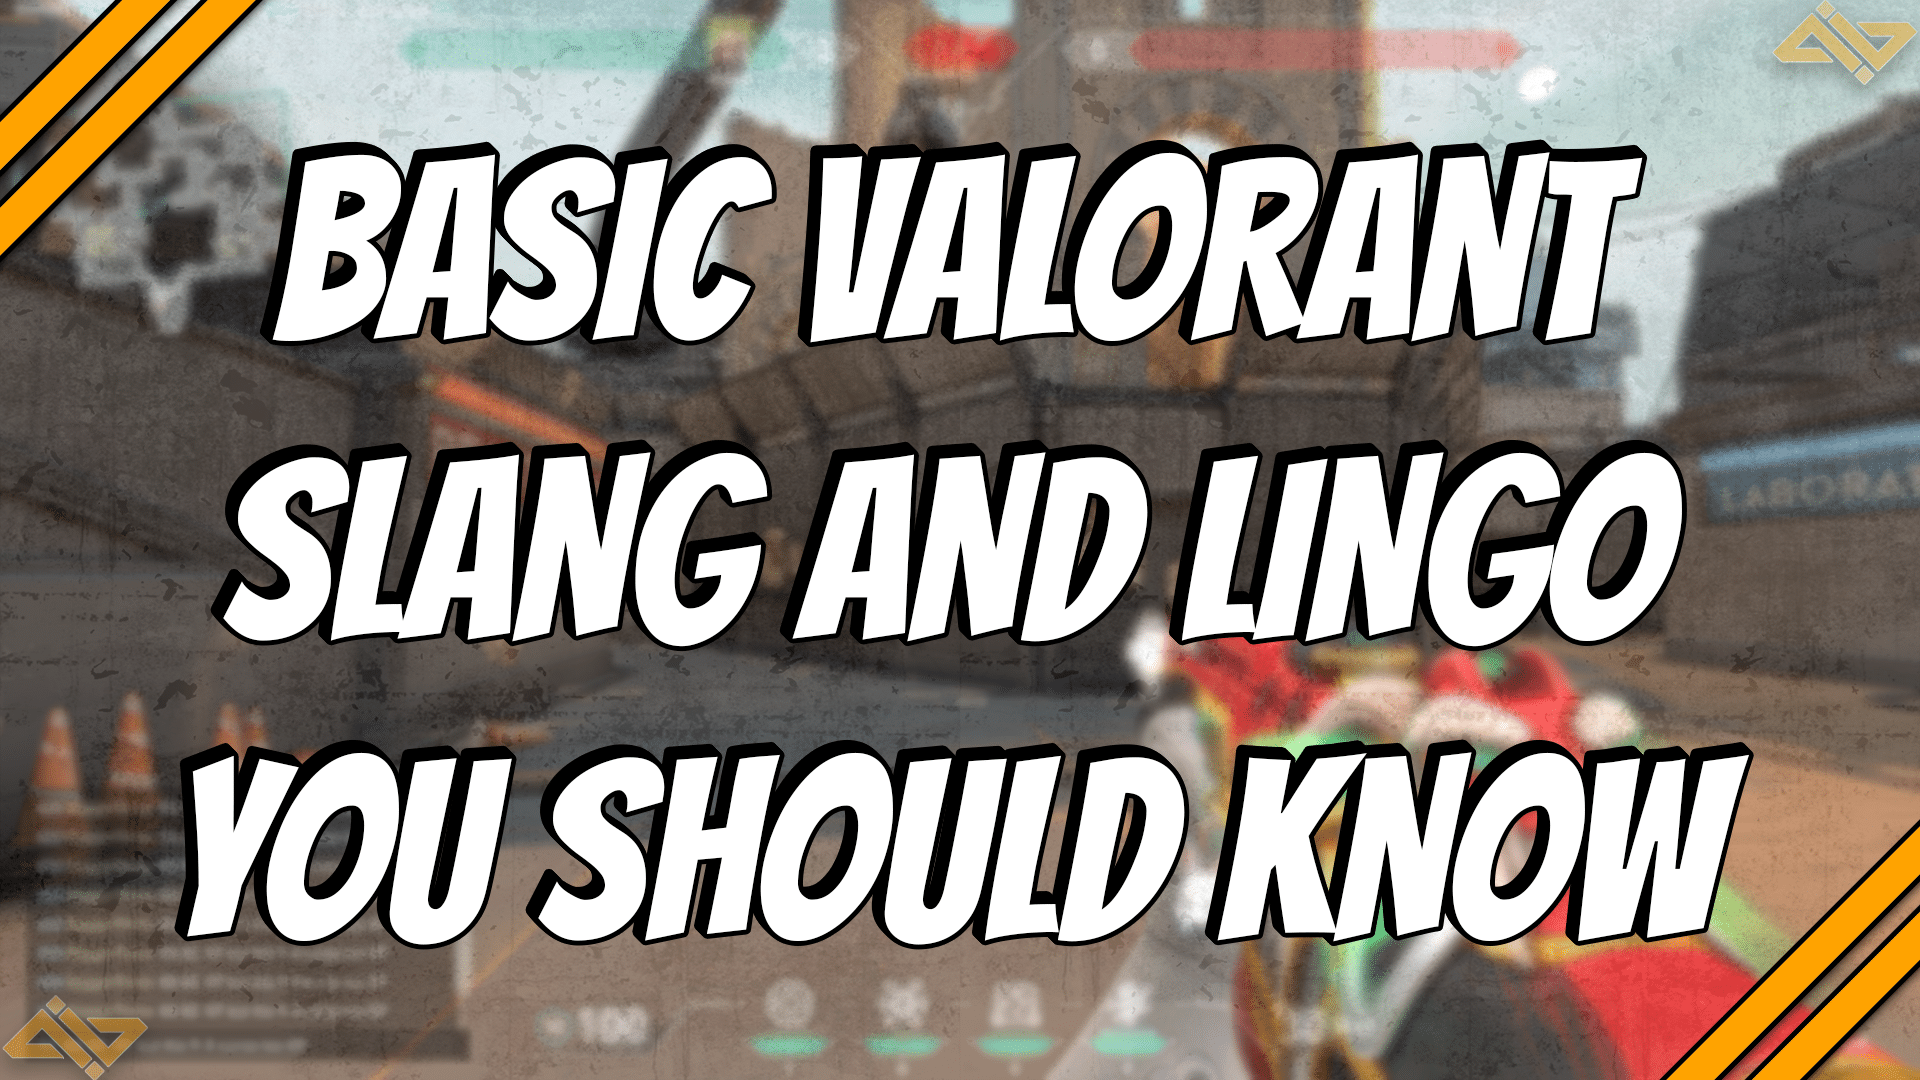 What do these Valorant terms mean: NT, GG, NS, and more